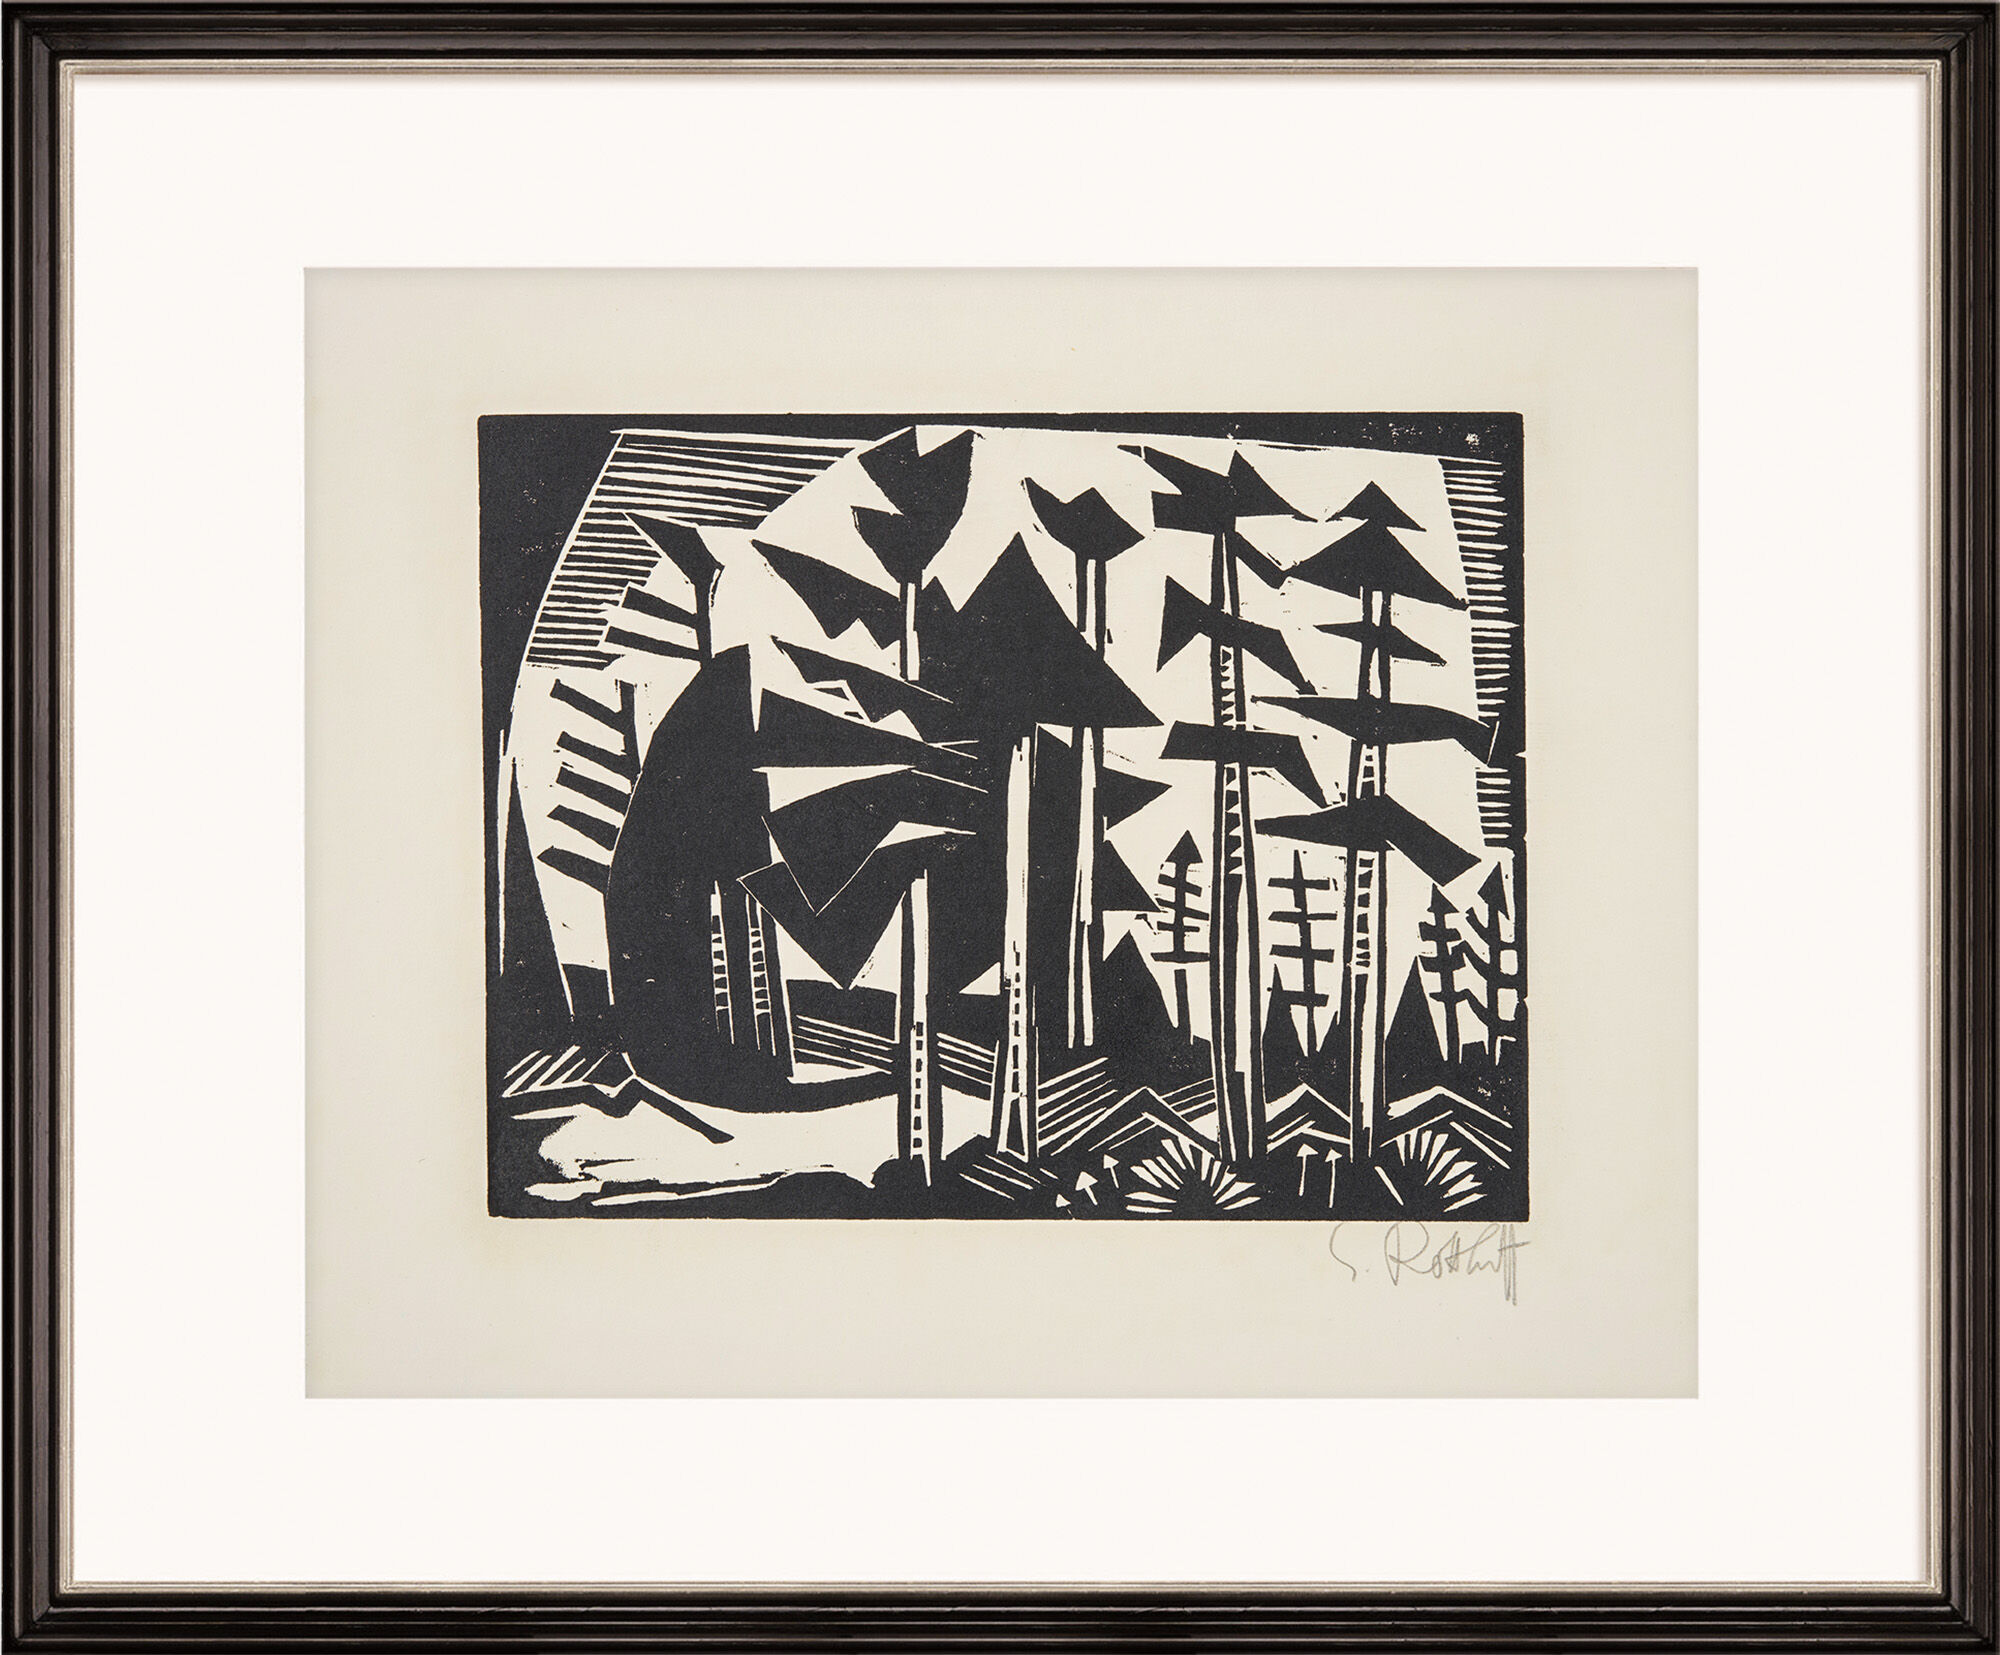 Picture "Russian Forest" (1918) by Karl Schmidt-Rottluff